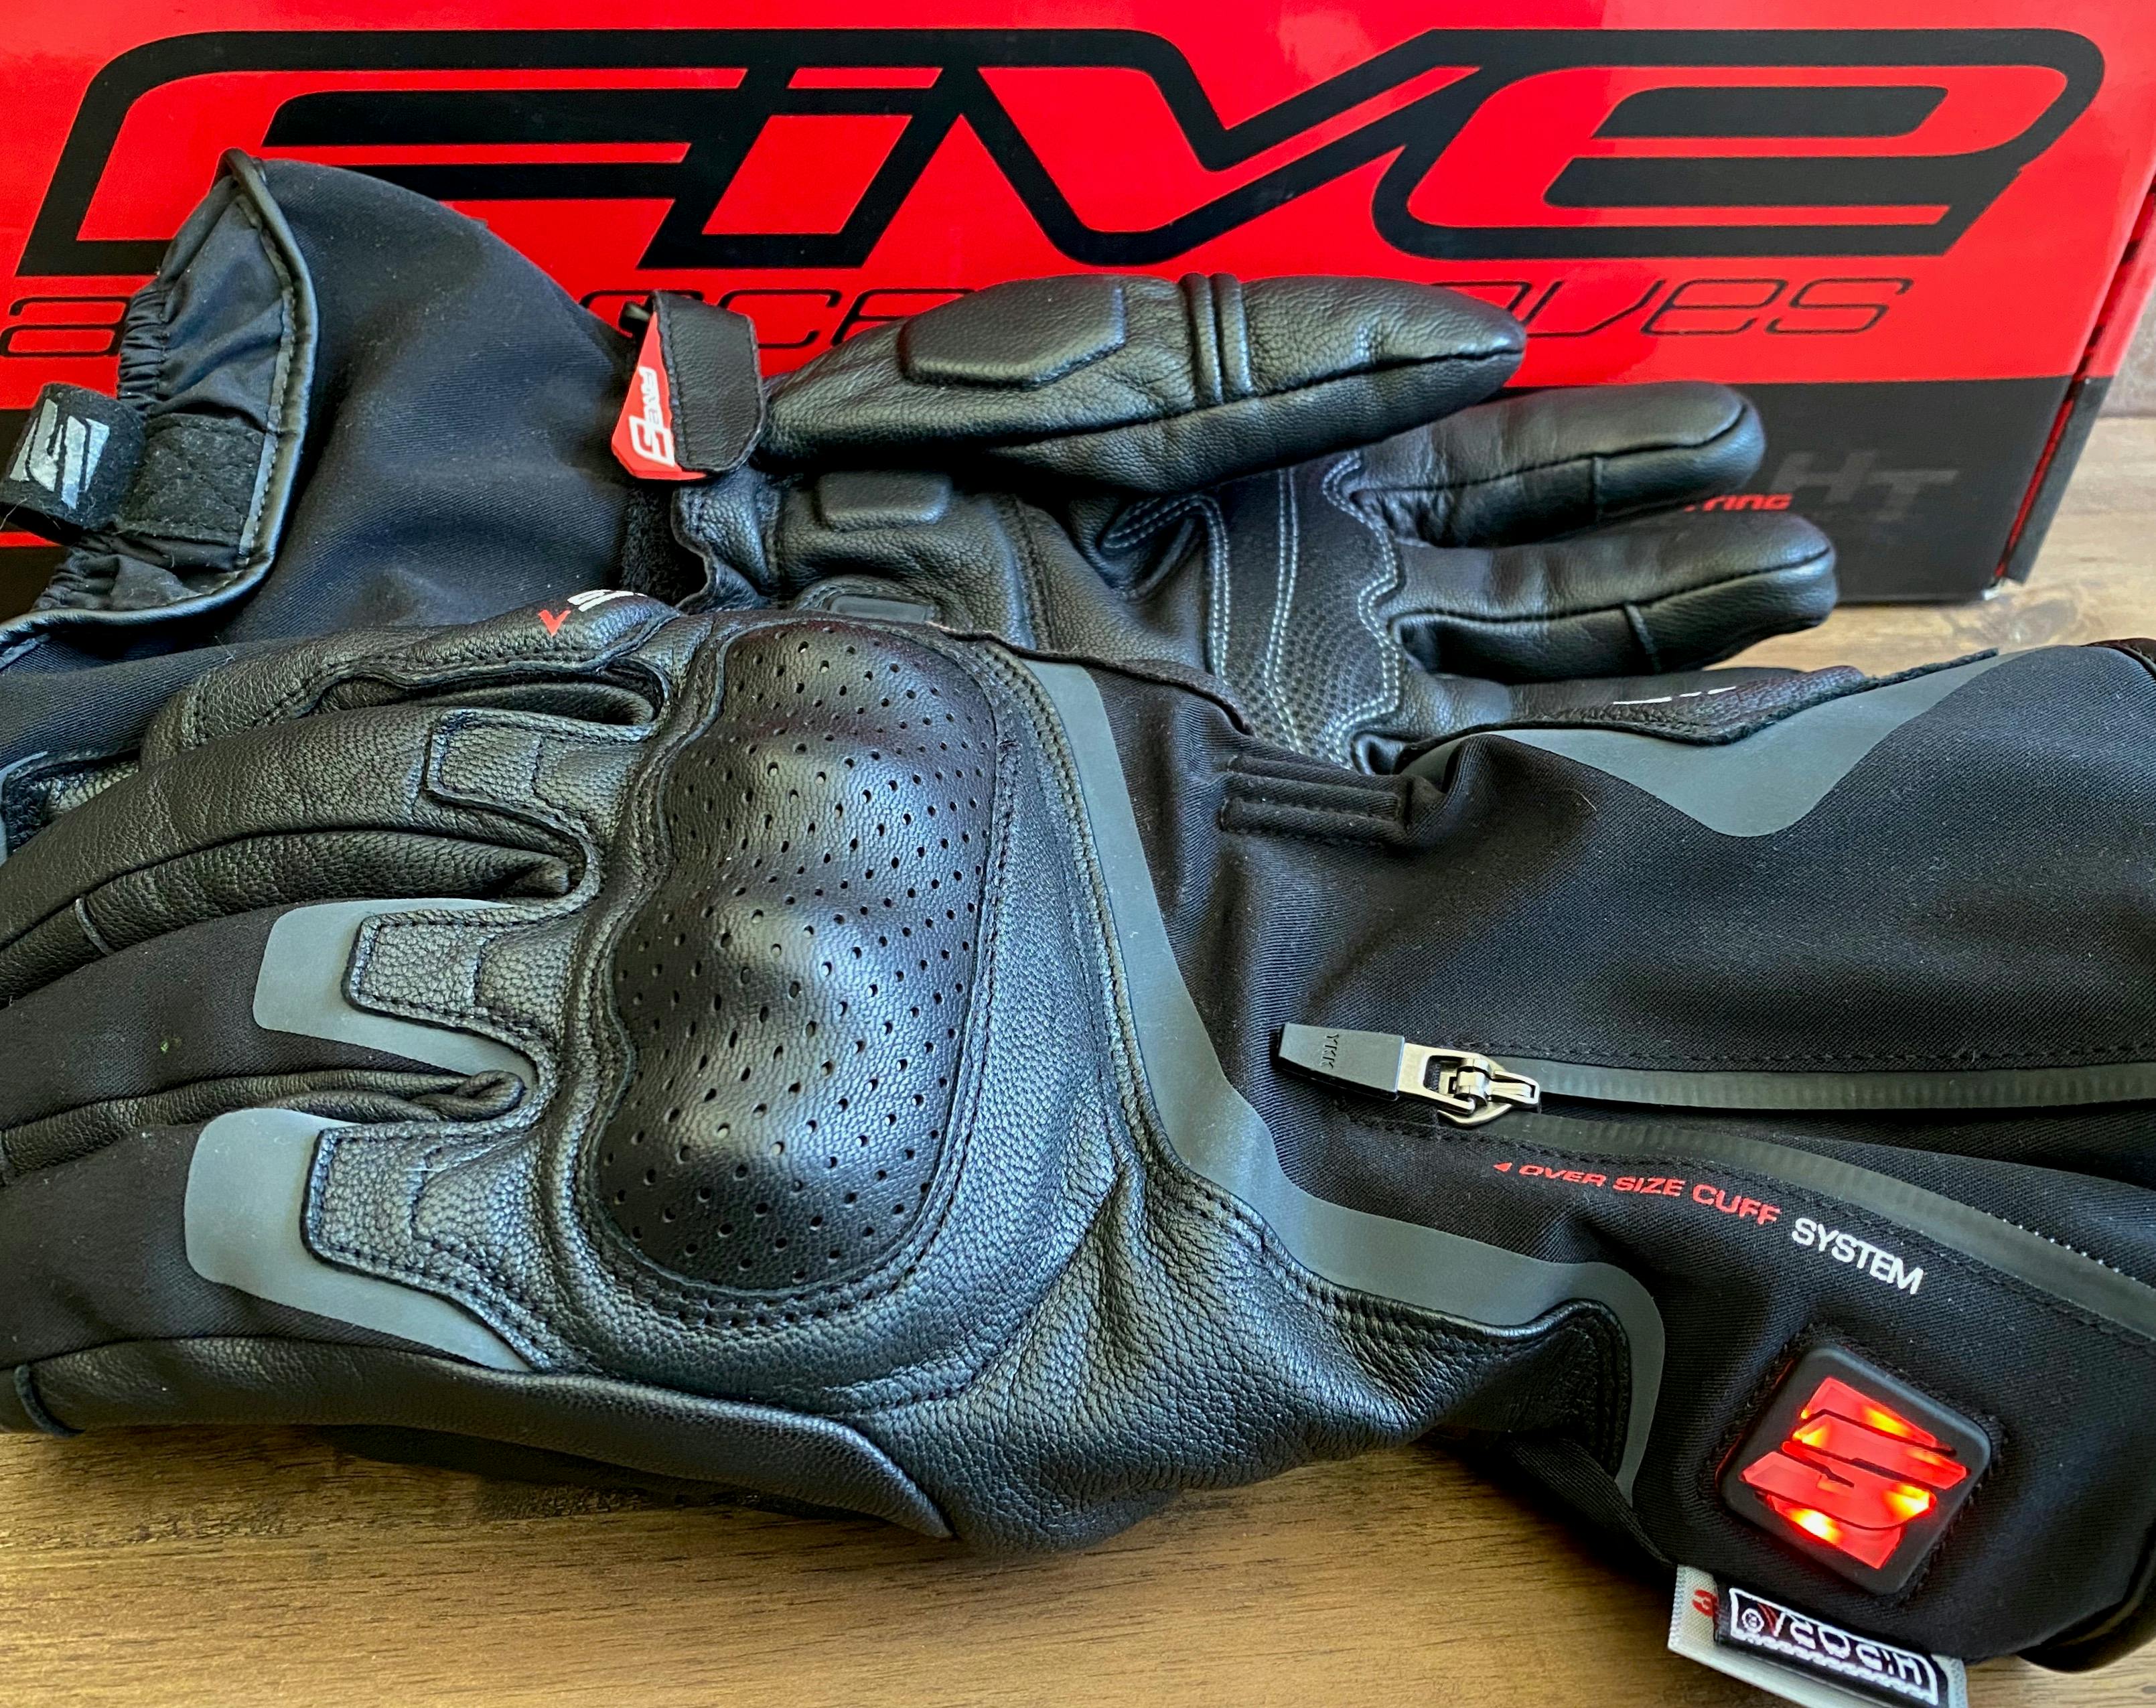 A pair of Five HG-1 gloves in front of their red box